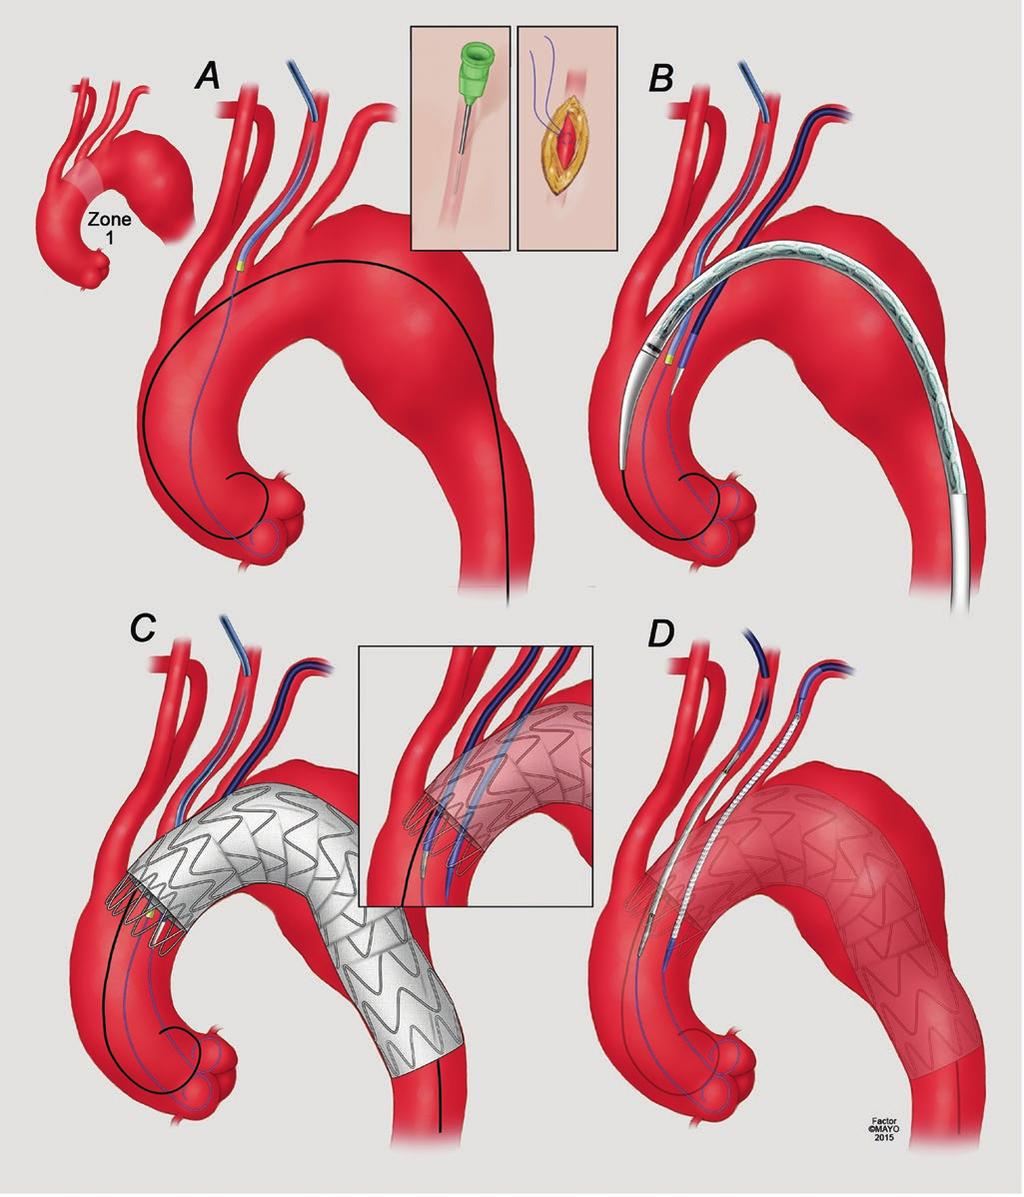 35 Parallel Stent Graft Techniques to Facilitate Endovascular Repair in the Aortic Arch 549 Fig. 35.3 (a) Access via left carotid artery (retrograde) using percutaneous puncture or small incision.